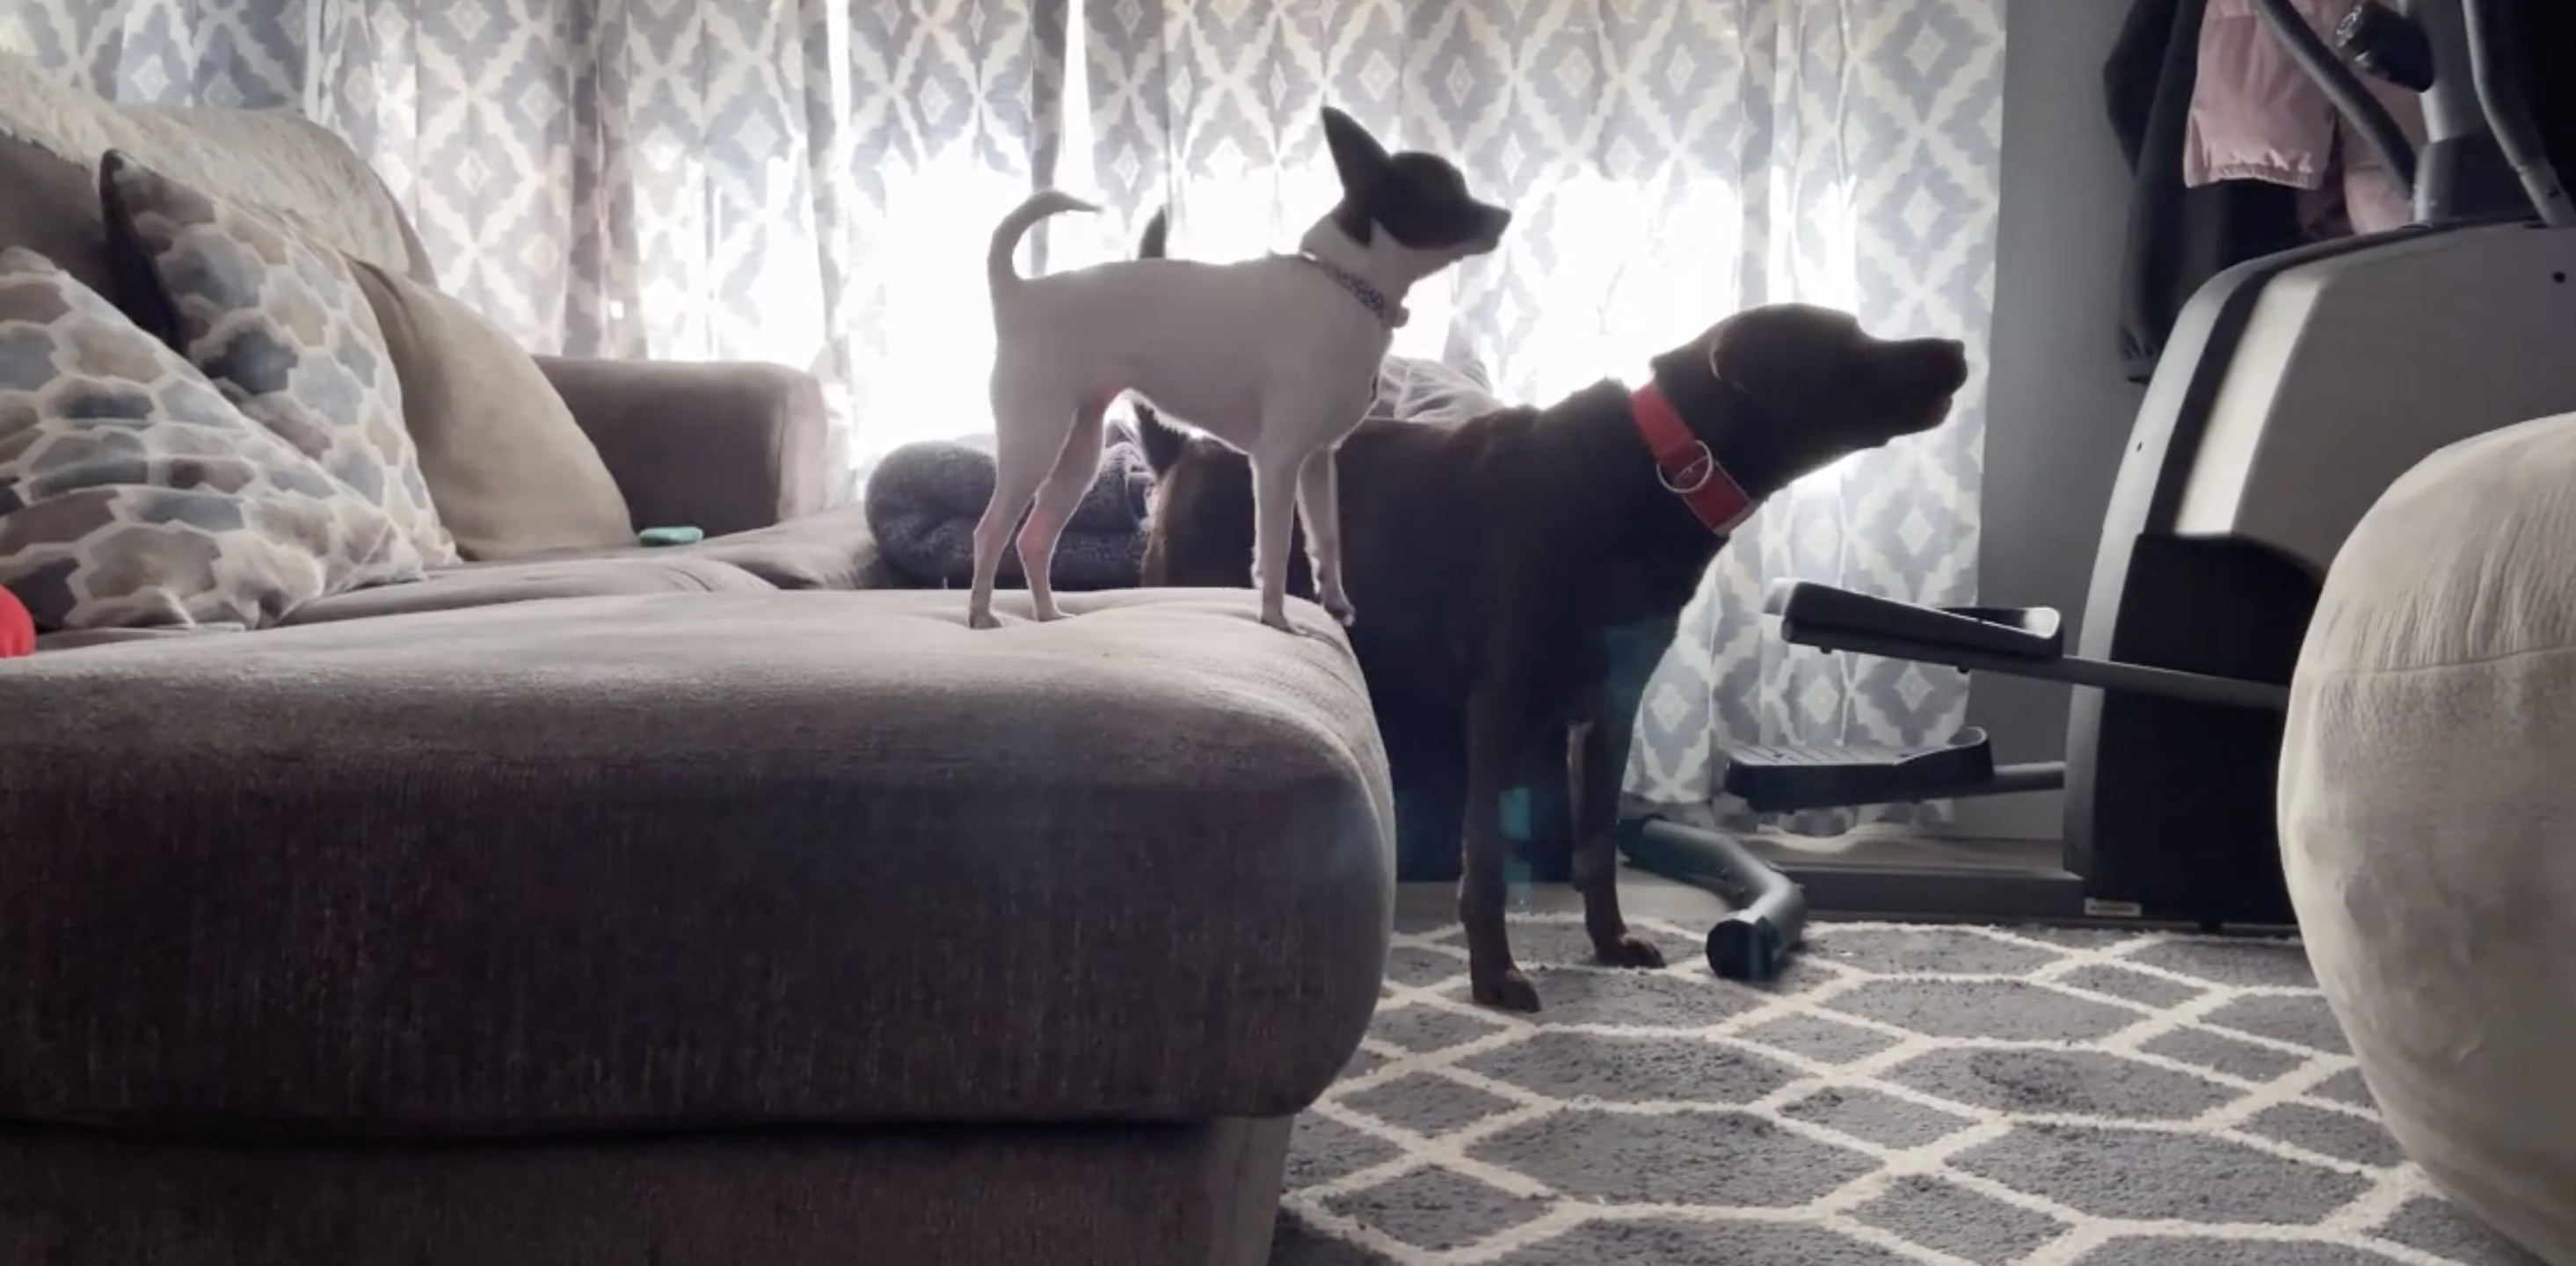 a large brown dog and a small white dog with black head in a livingroom